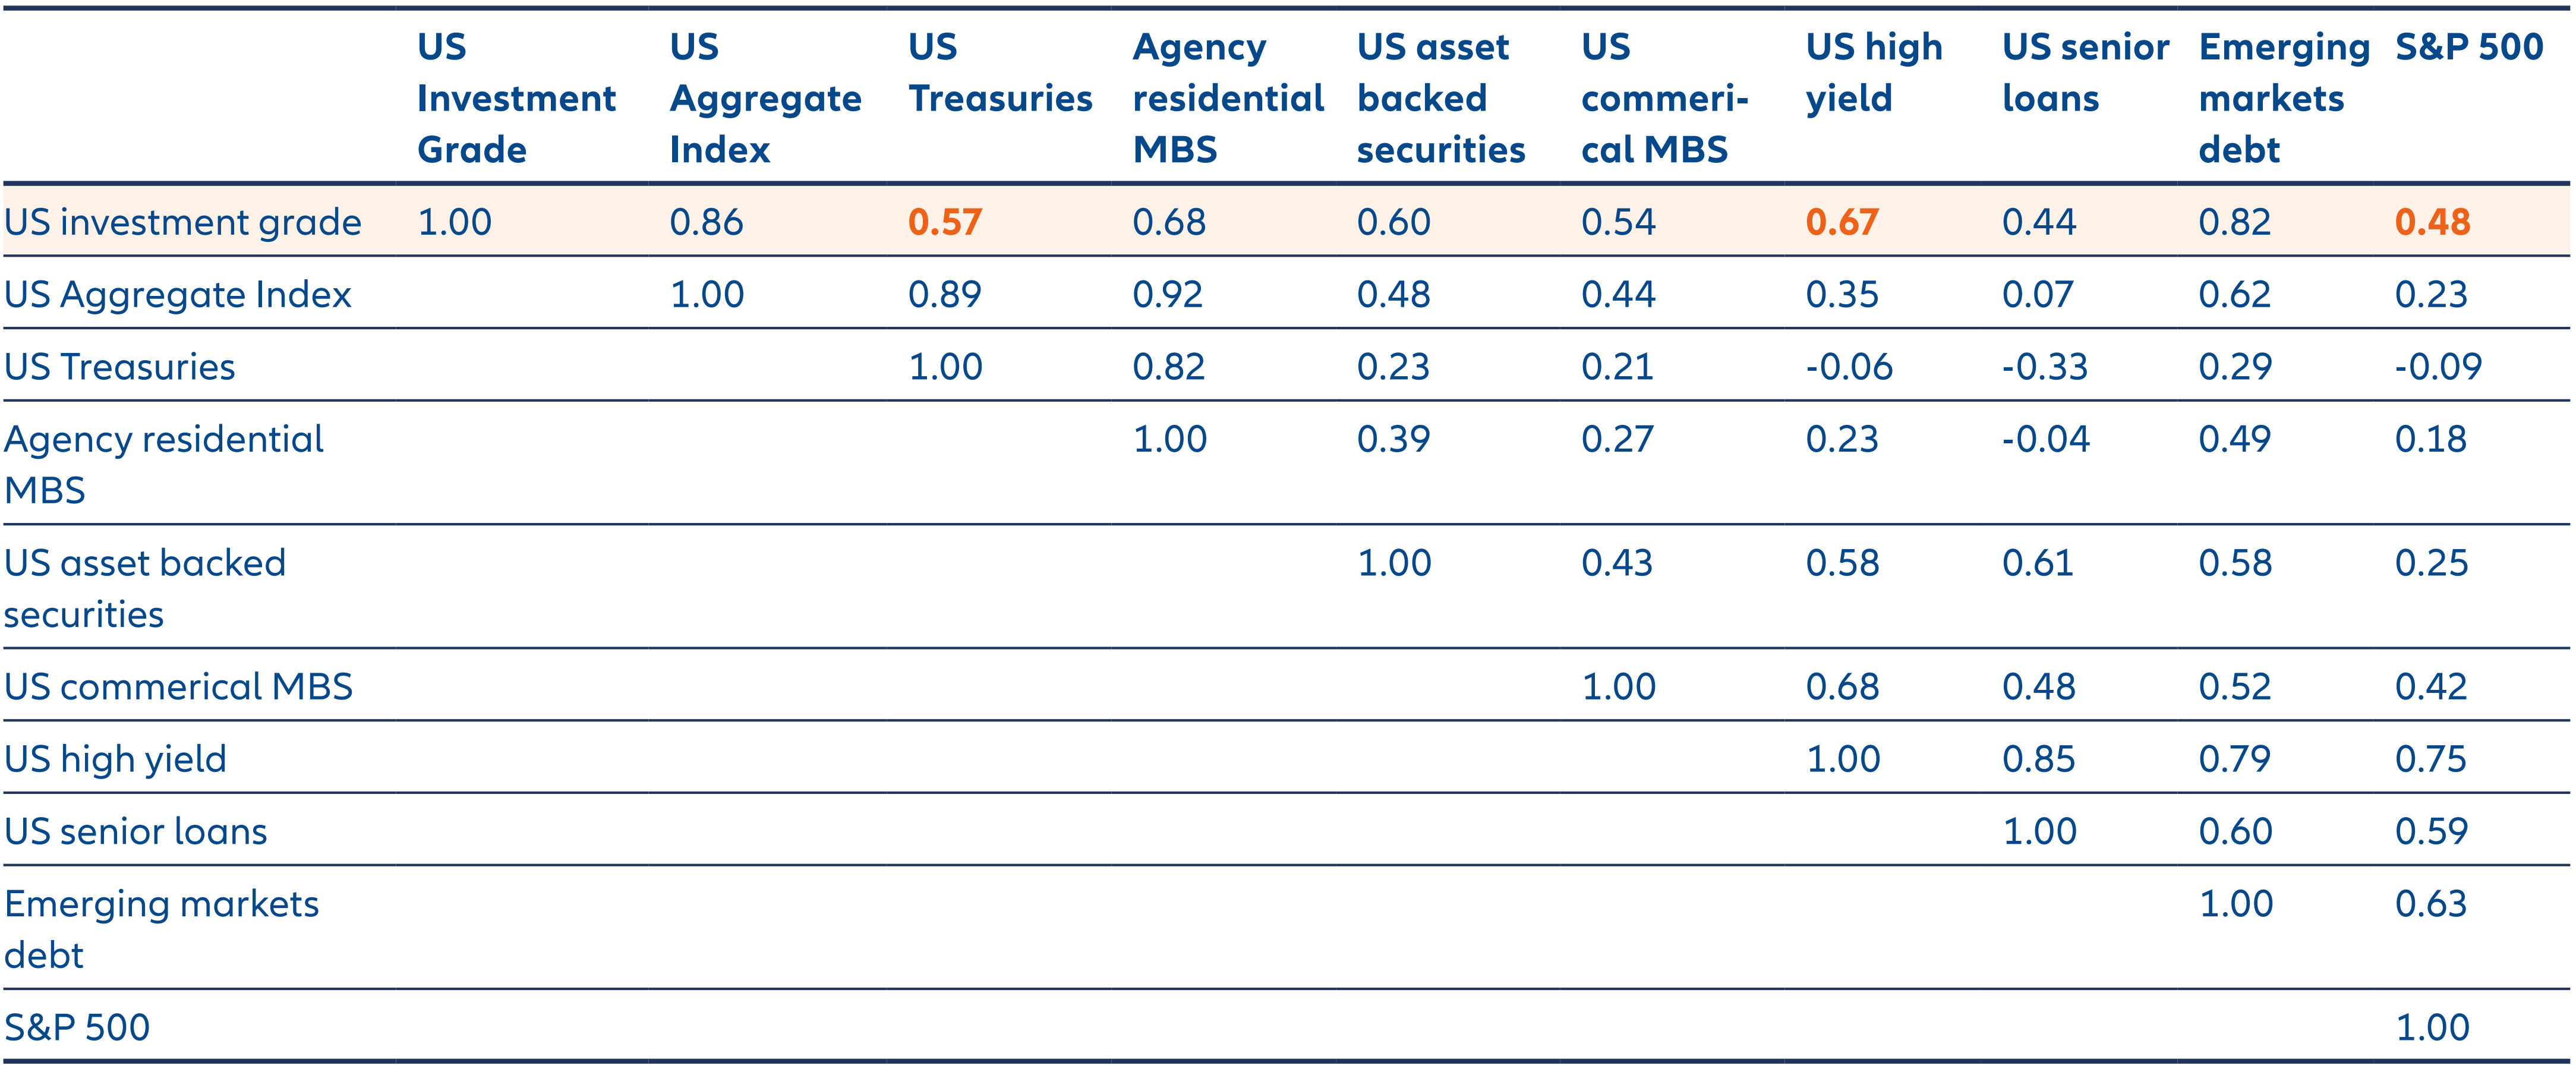 Exhibit 7: US IG corporates have low correlations to selected asset classes